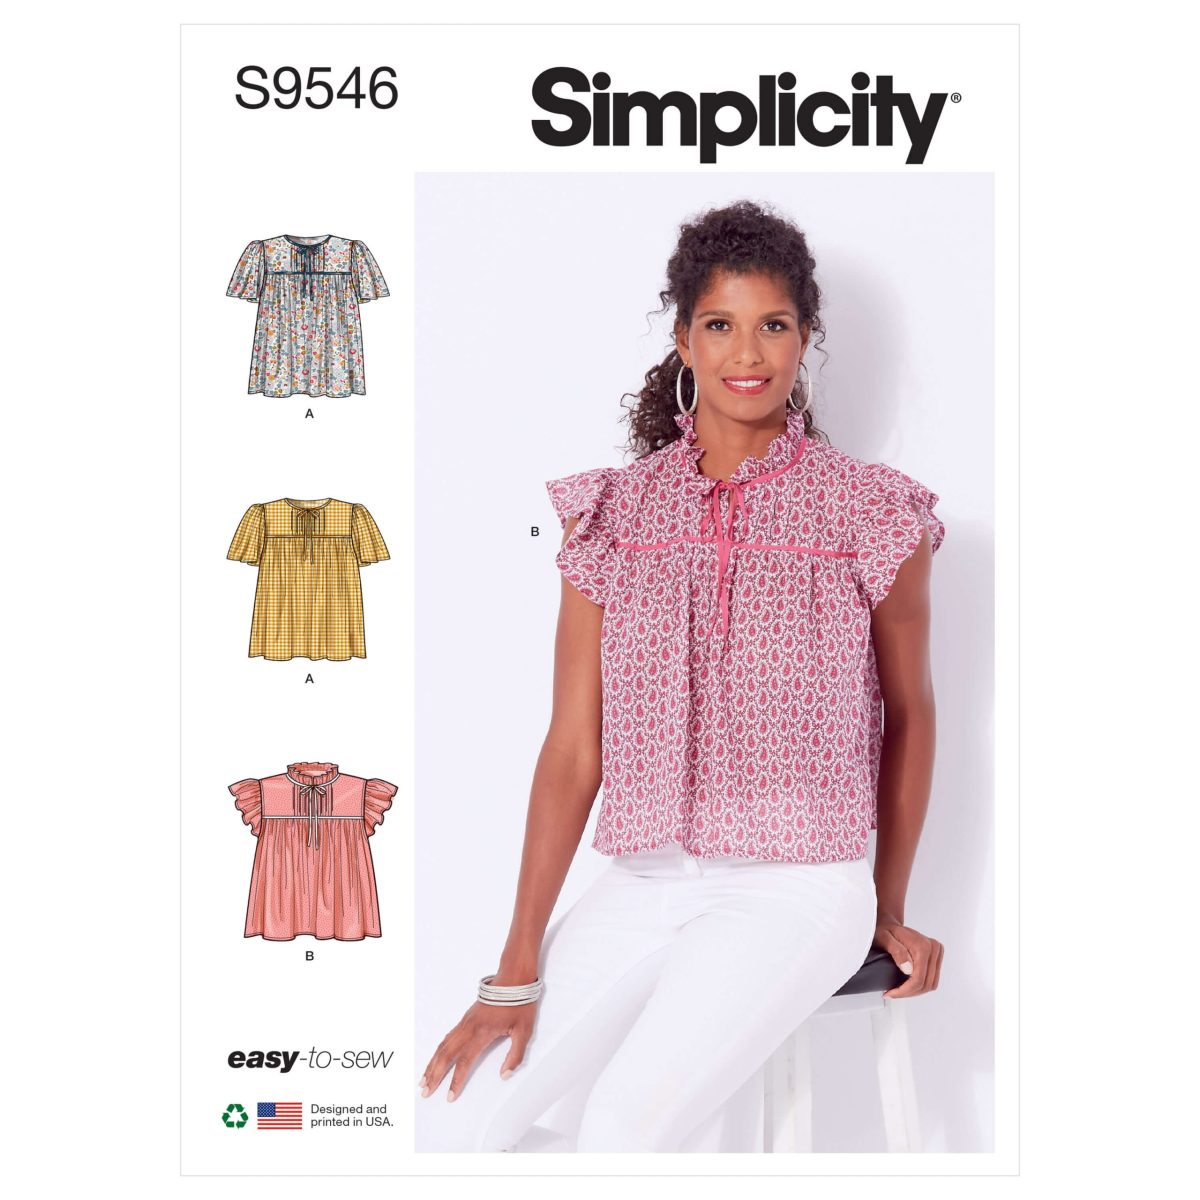 Simplicity Sewing Pattern S9546 Misses' Tops